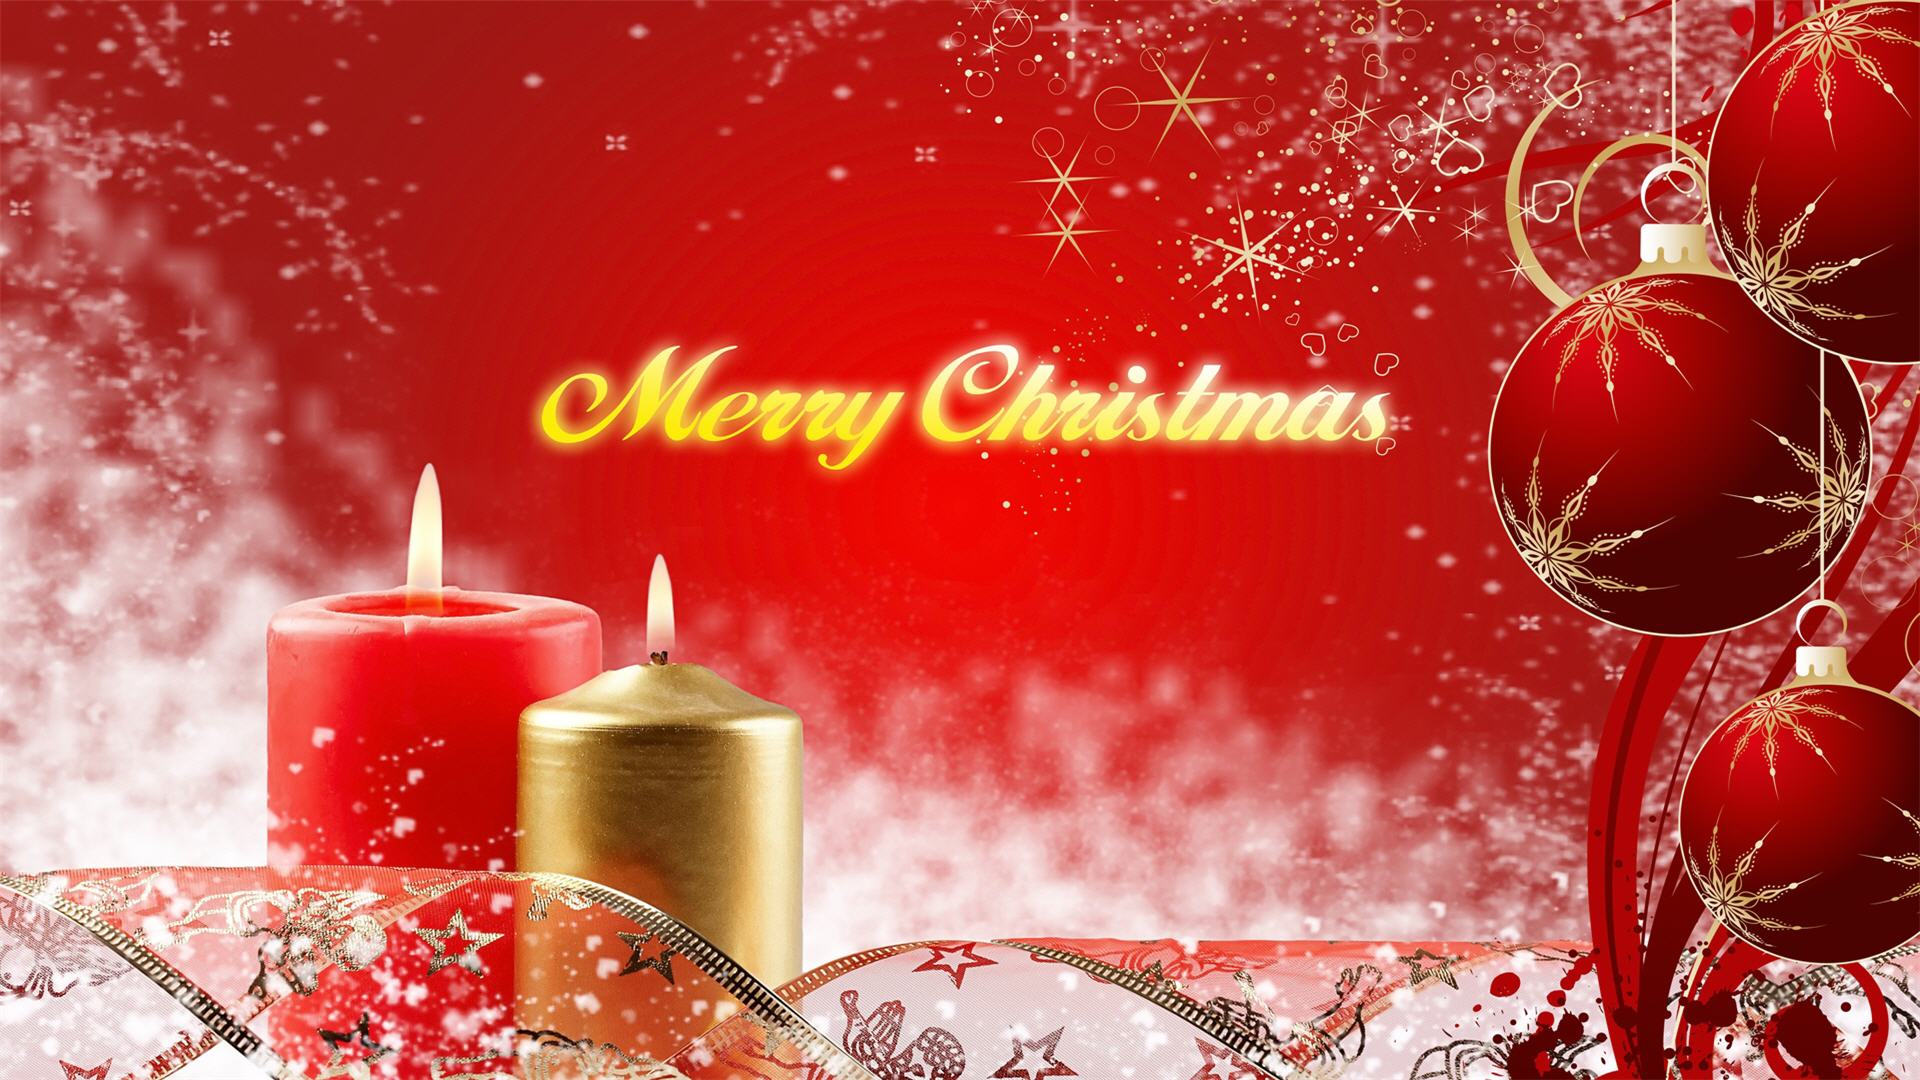 Merry Christmas Candle - Beautiful Christmas Desktop Background , HD Wallpaper & Backgrounds